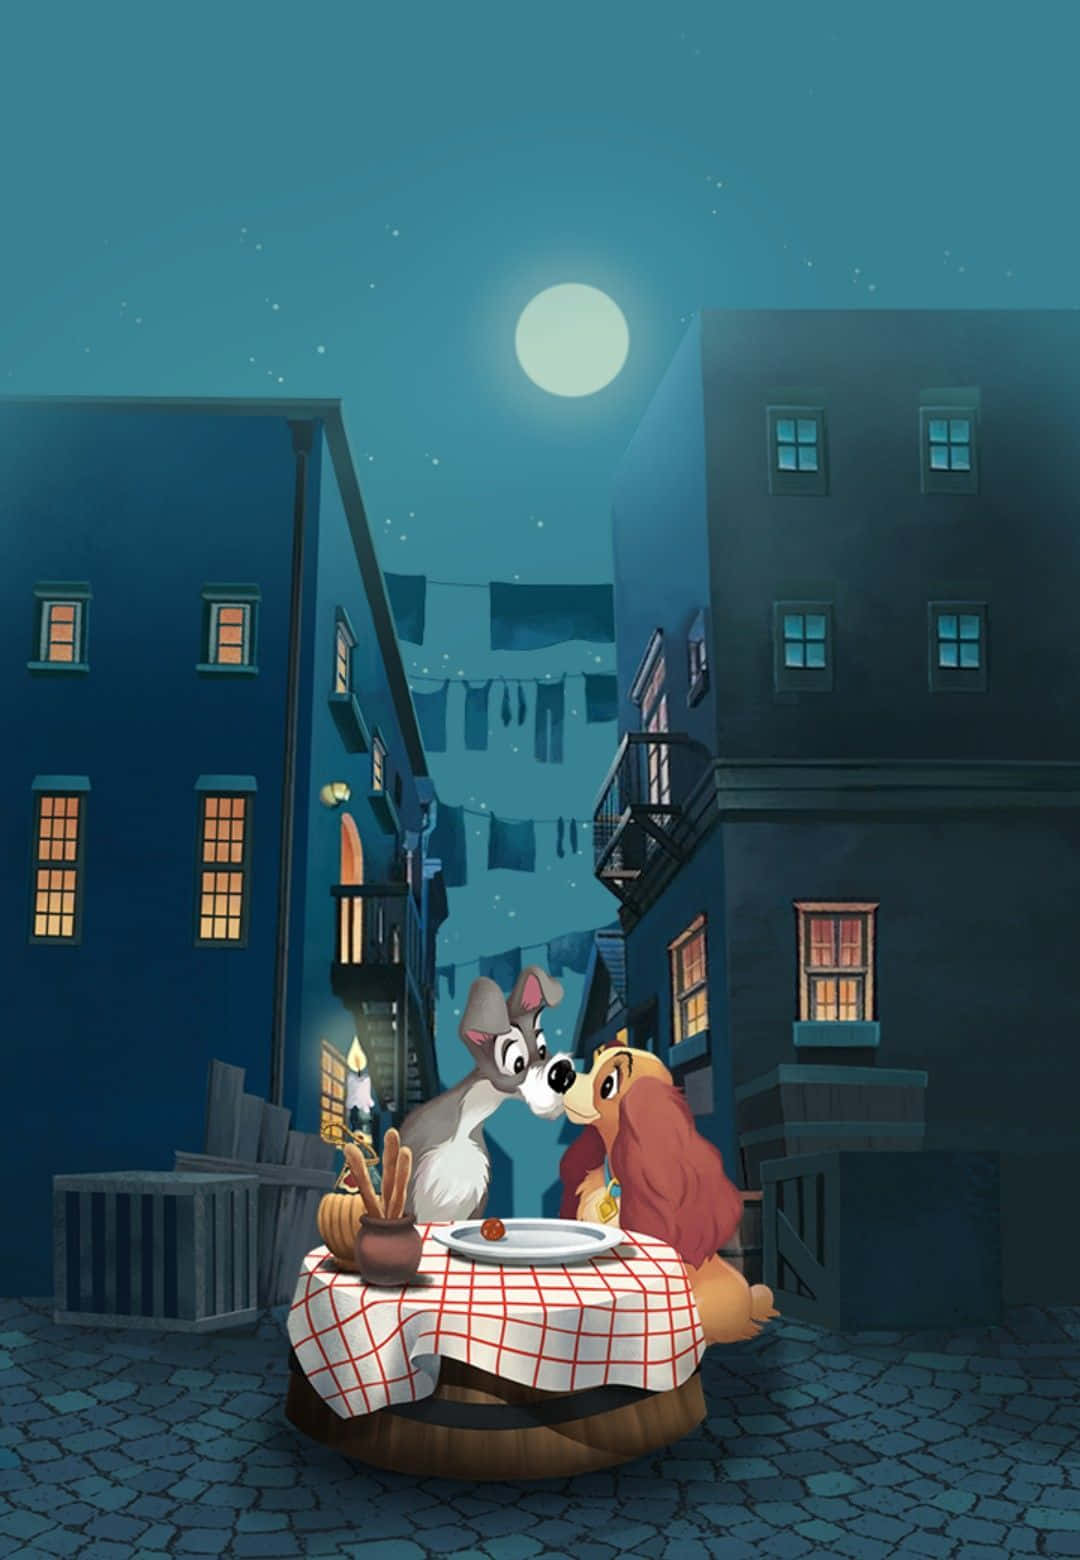 Lady and the Tramp sharing a romantic moment Wallpaper